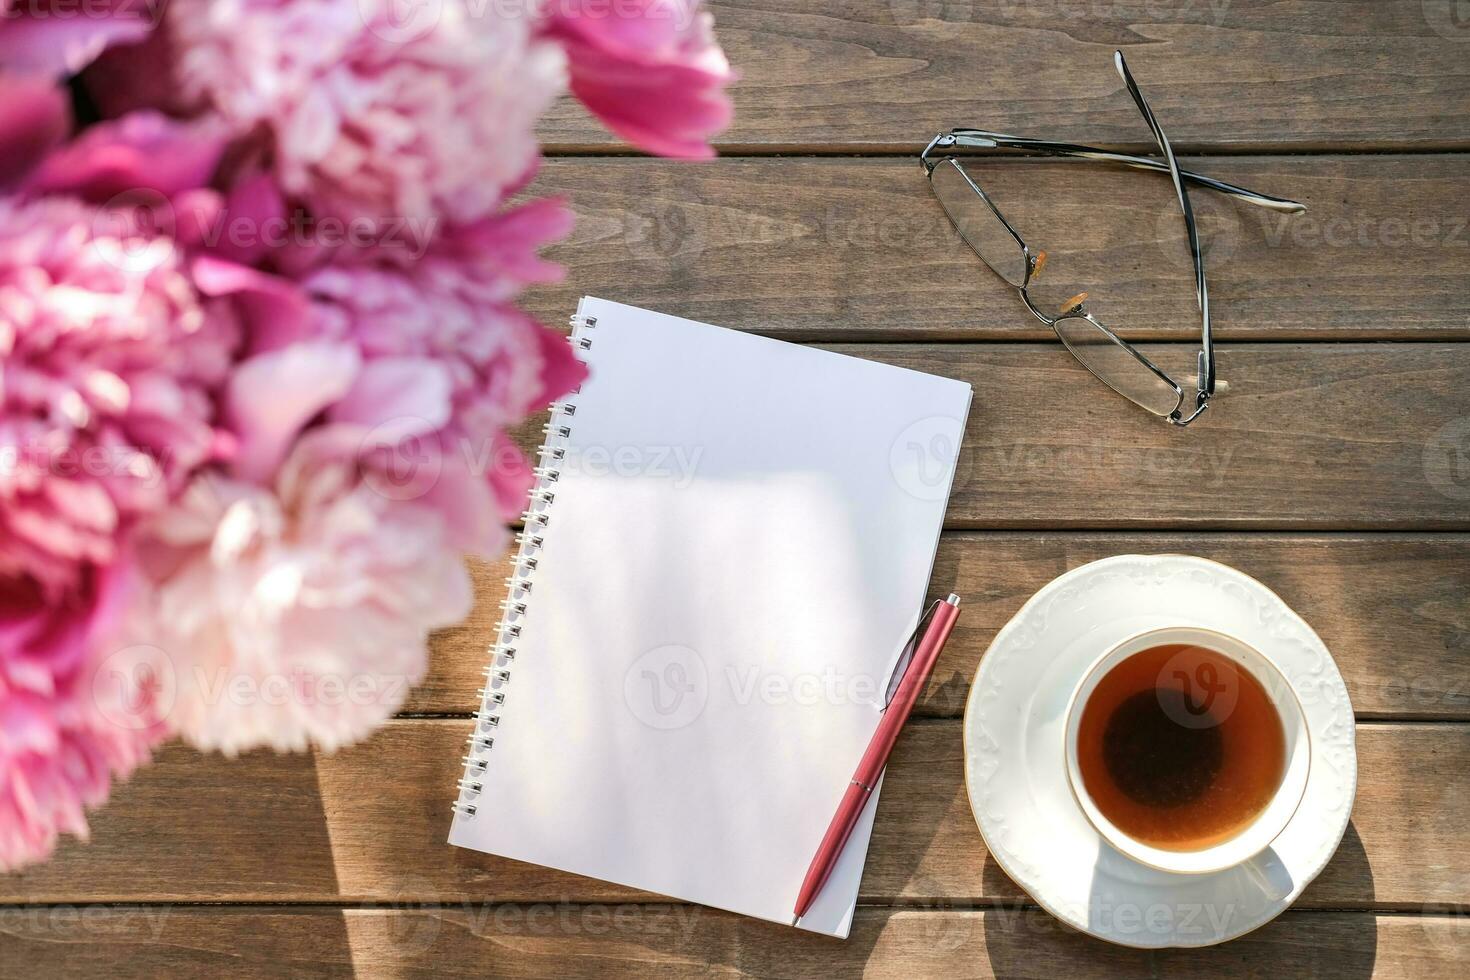 Notepad, pen and tea cup on a wooden table. Make a to-do list or shopping list. Wishlist, playlist photo